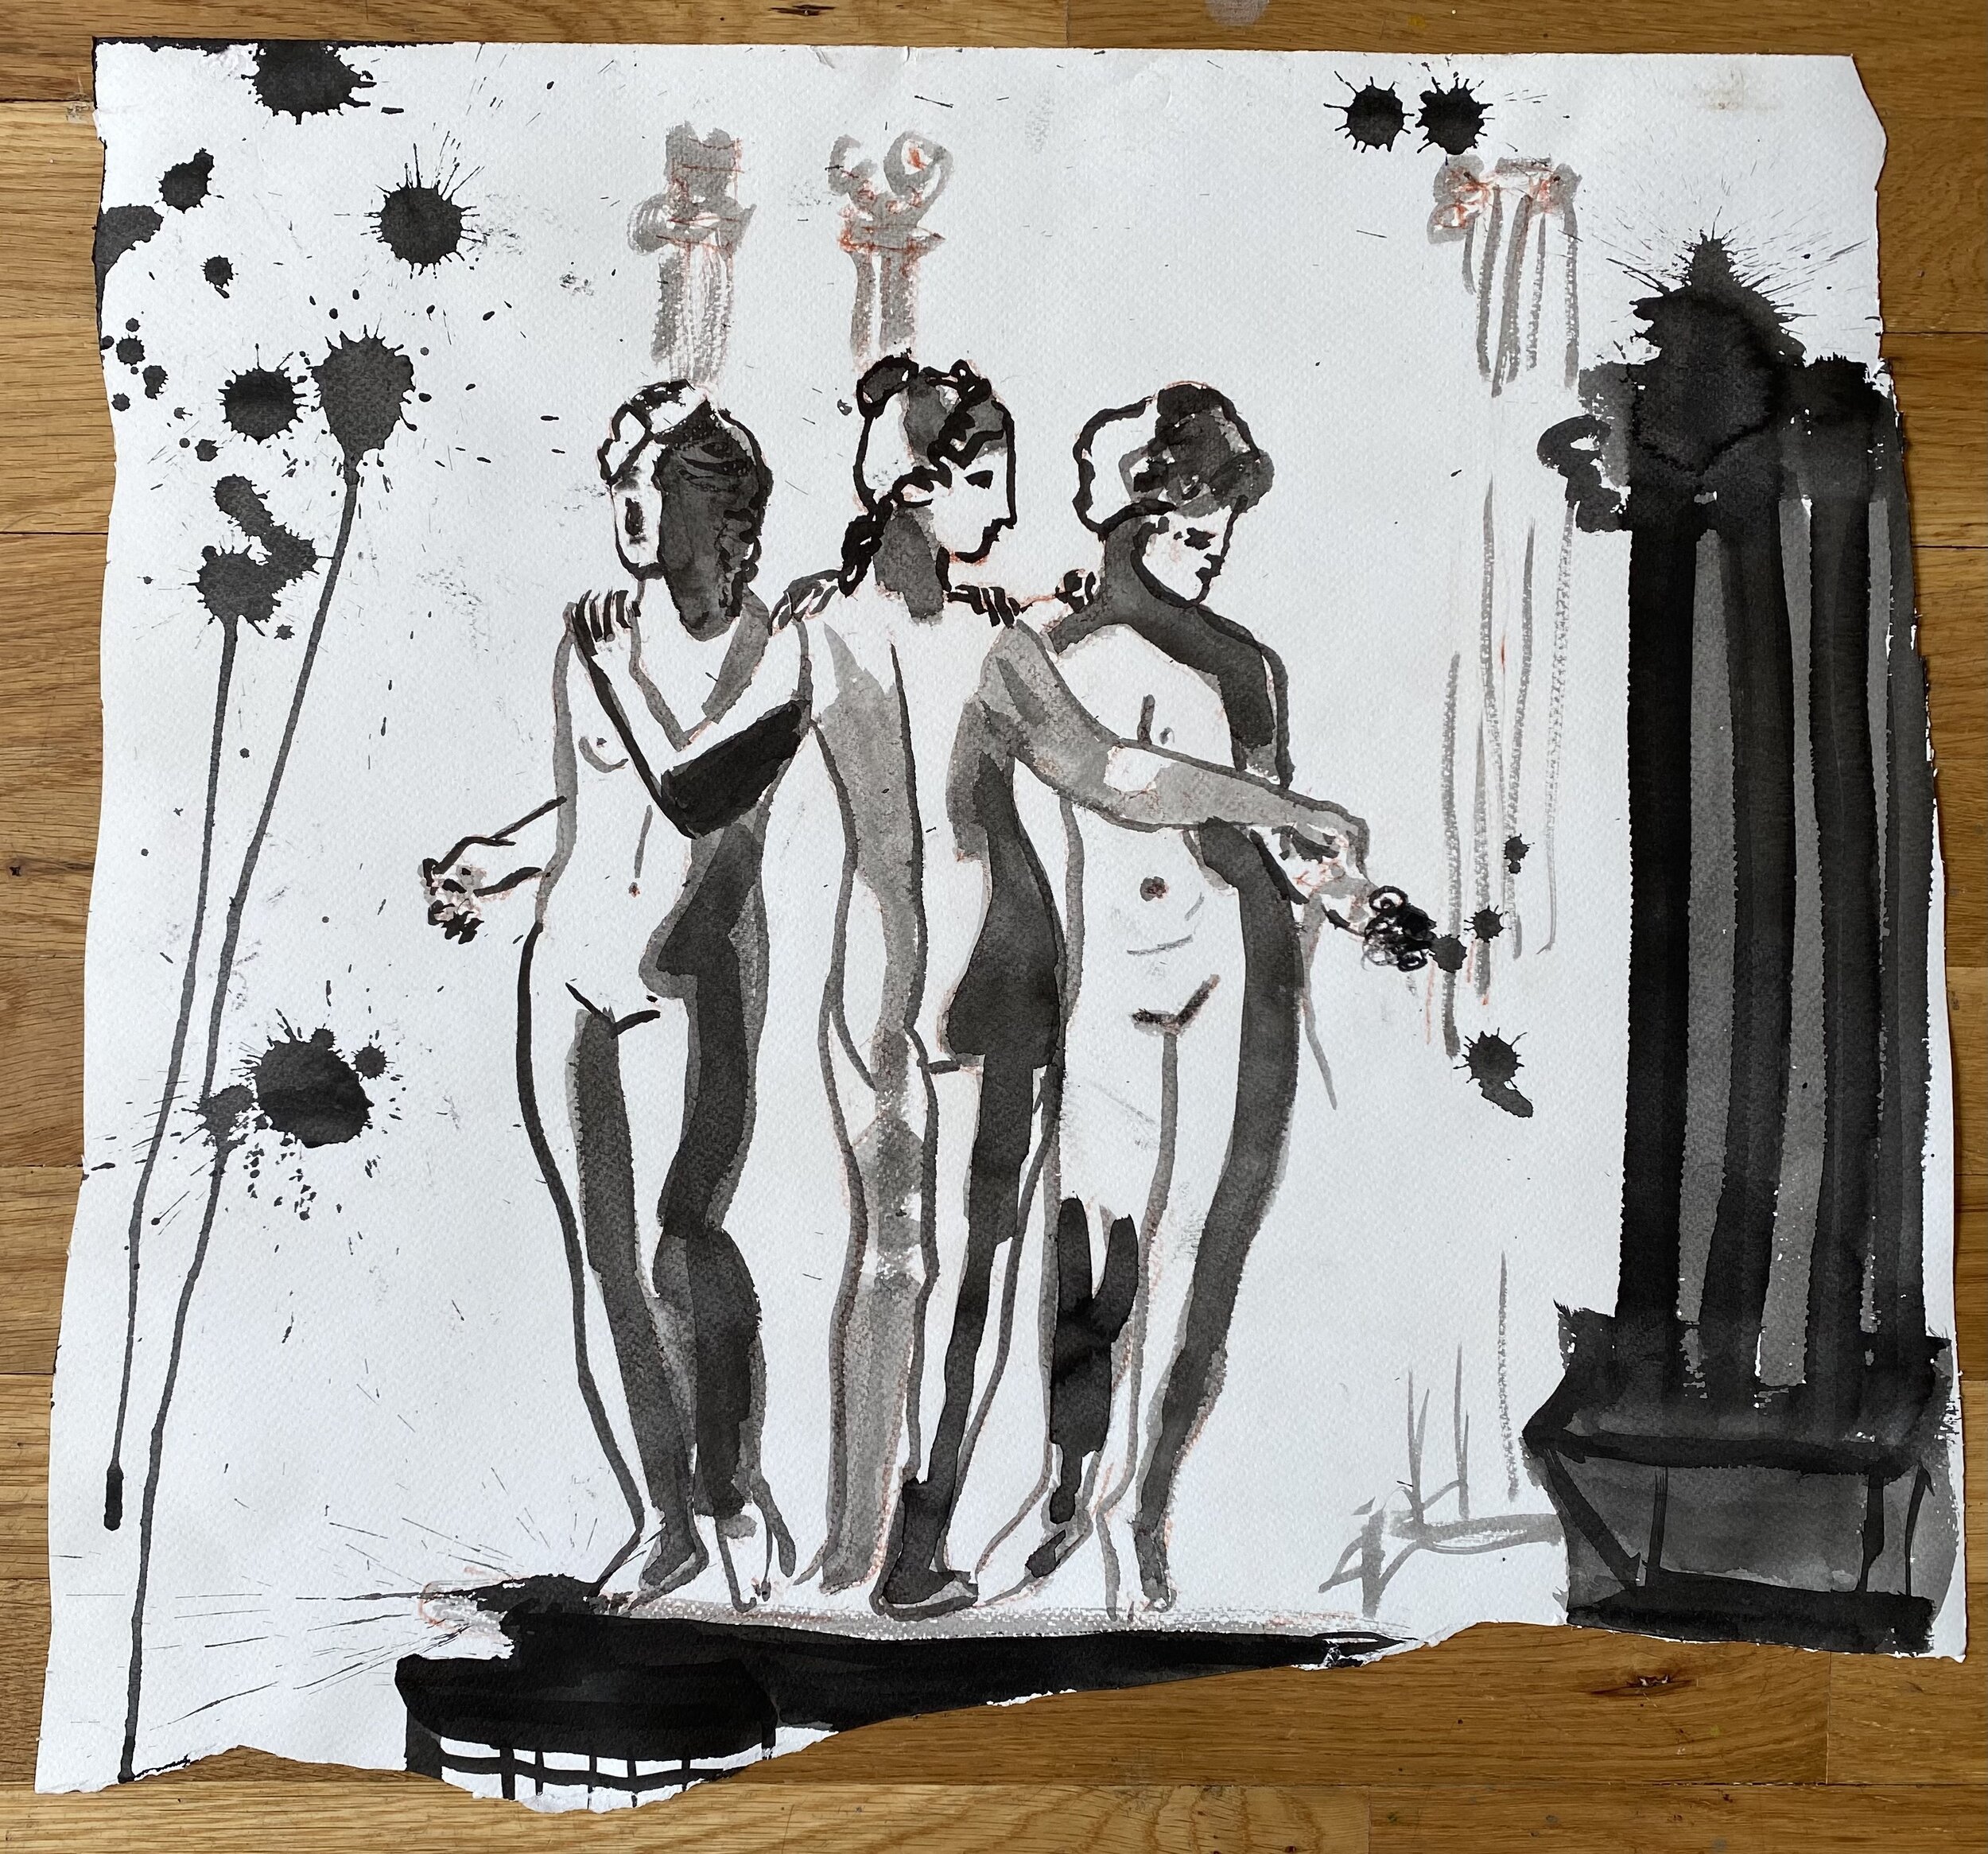 Muses+19%22+x+21%22+watercolor+on+paper+$275.jpg